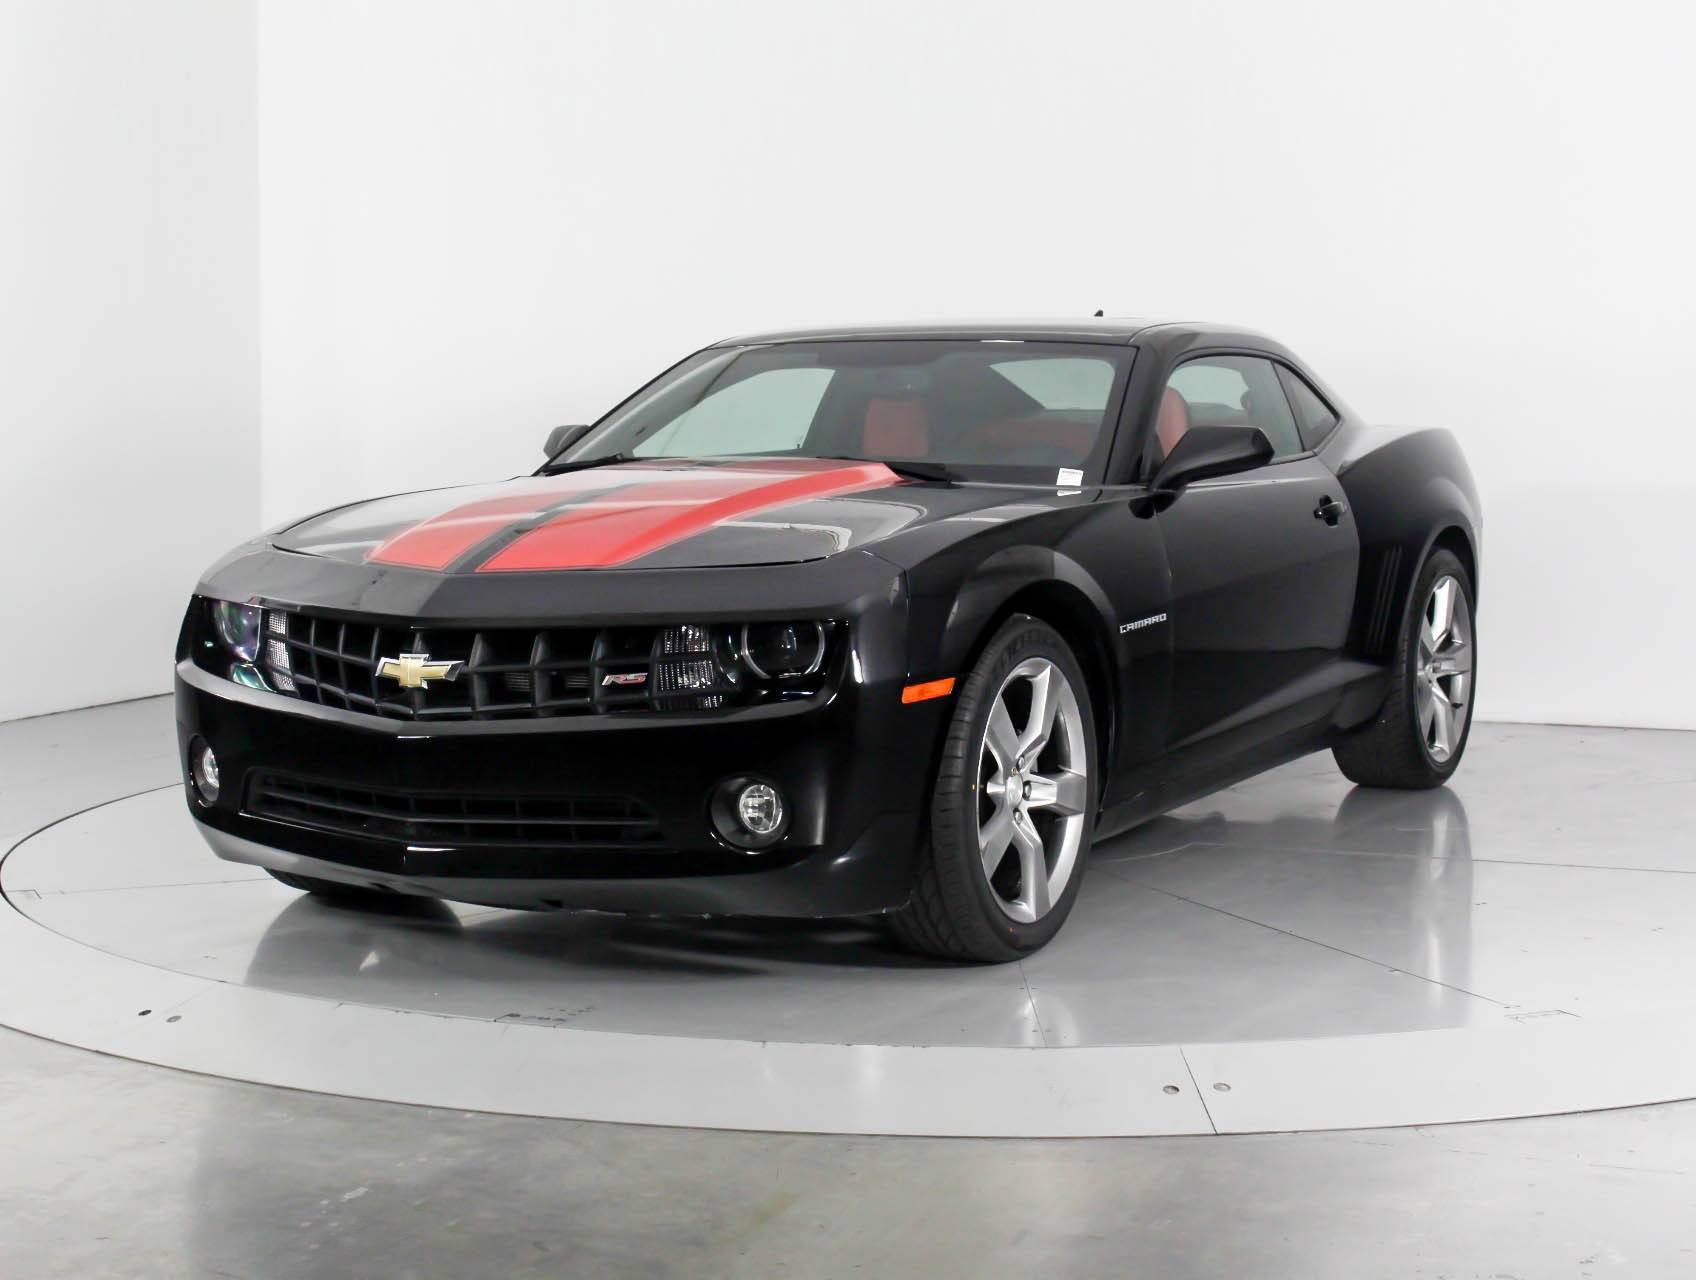 Used 2012 CHEVROLET CAMARO 2LT Coupe for sale in WEST PALM, FL | 100044